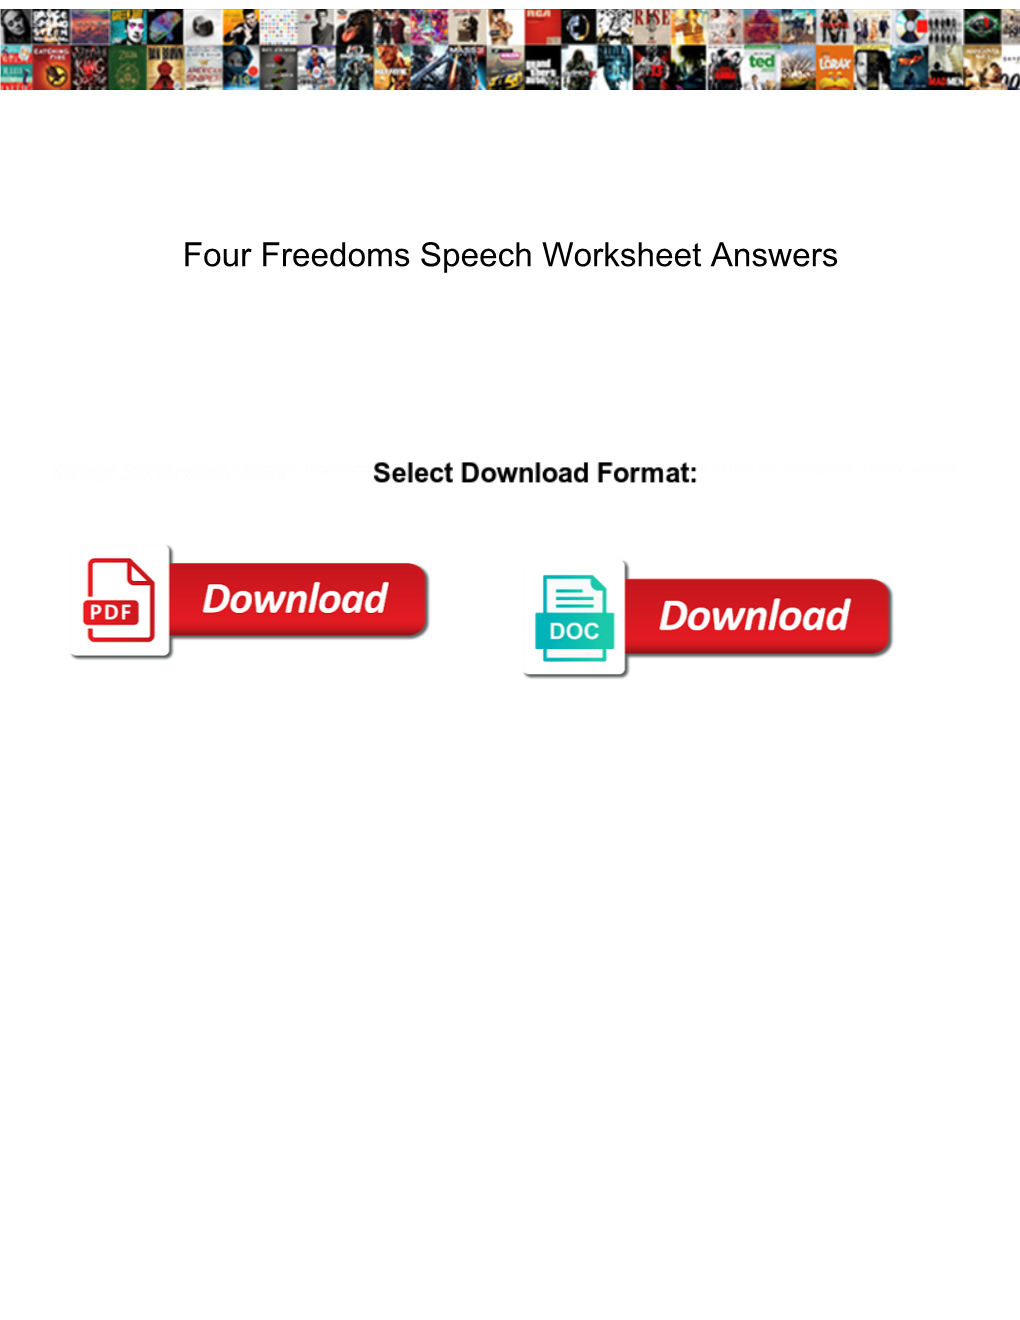 Four Freedoms Speech Worksheet Answers